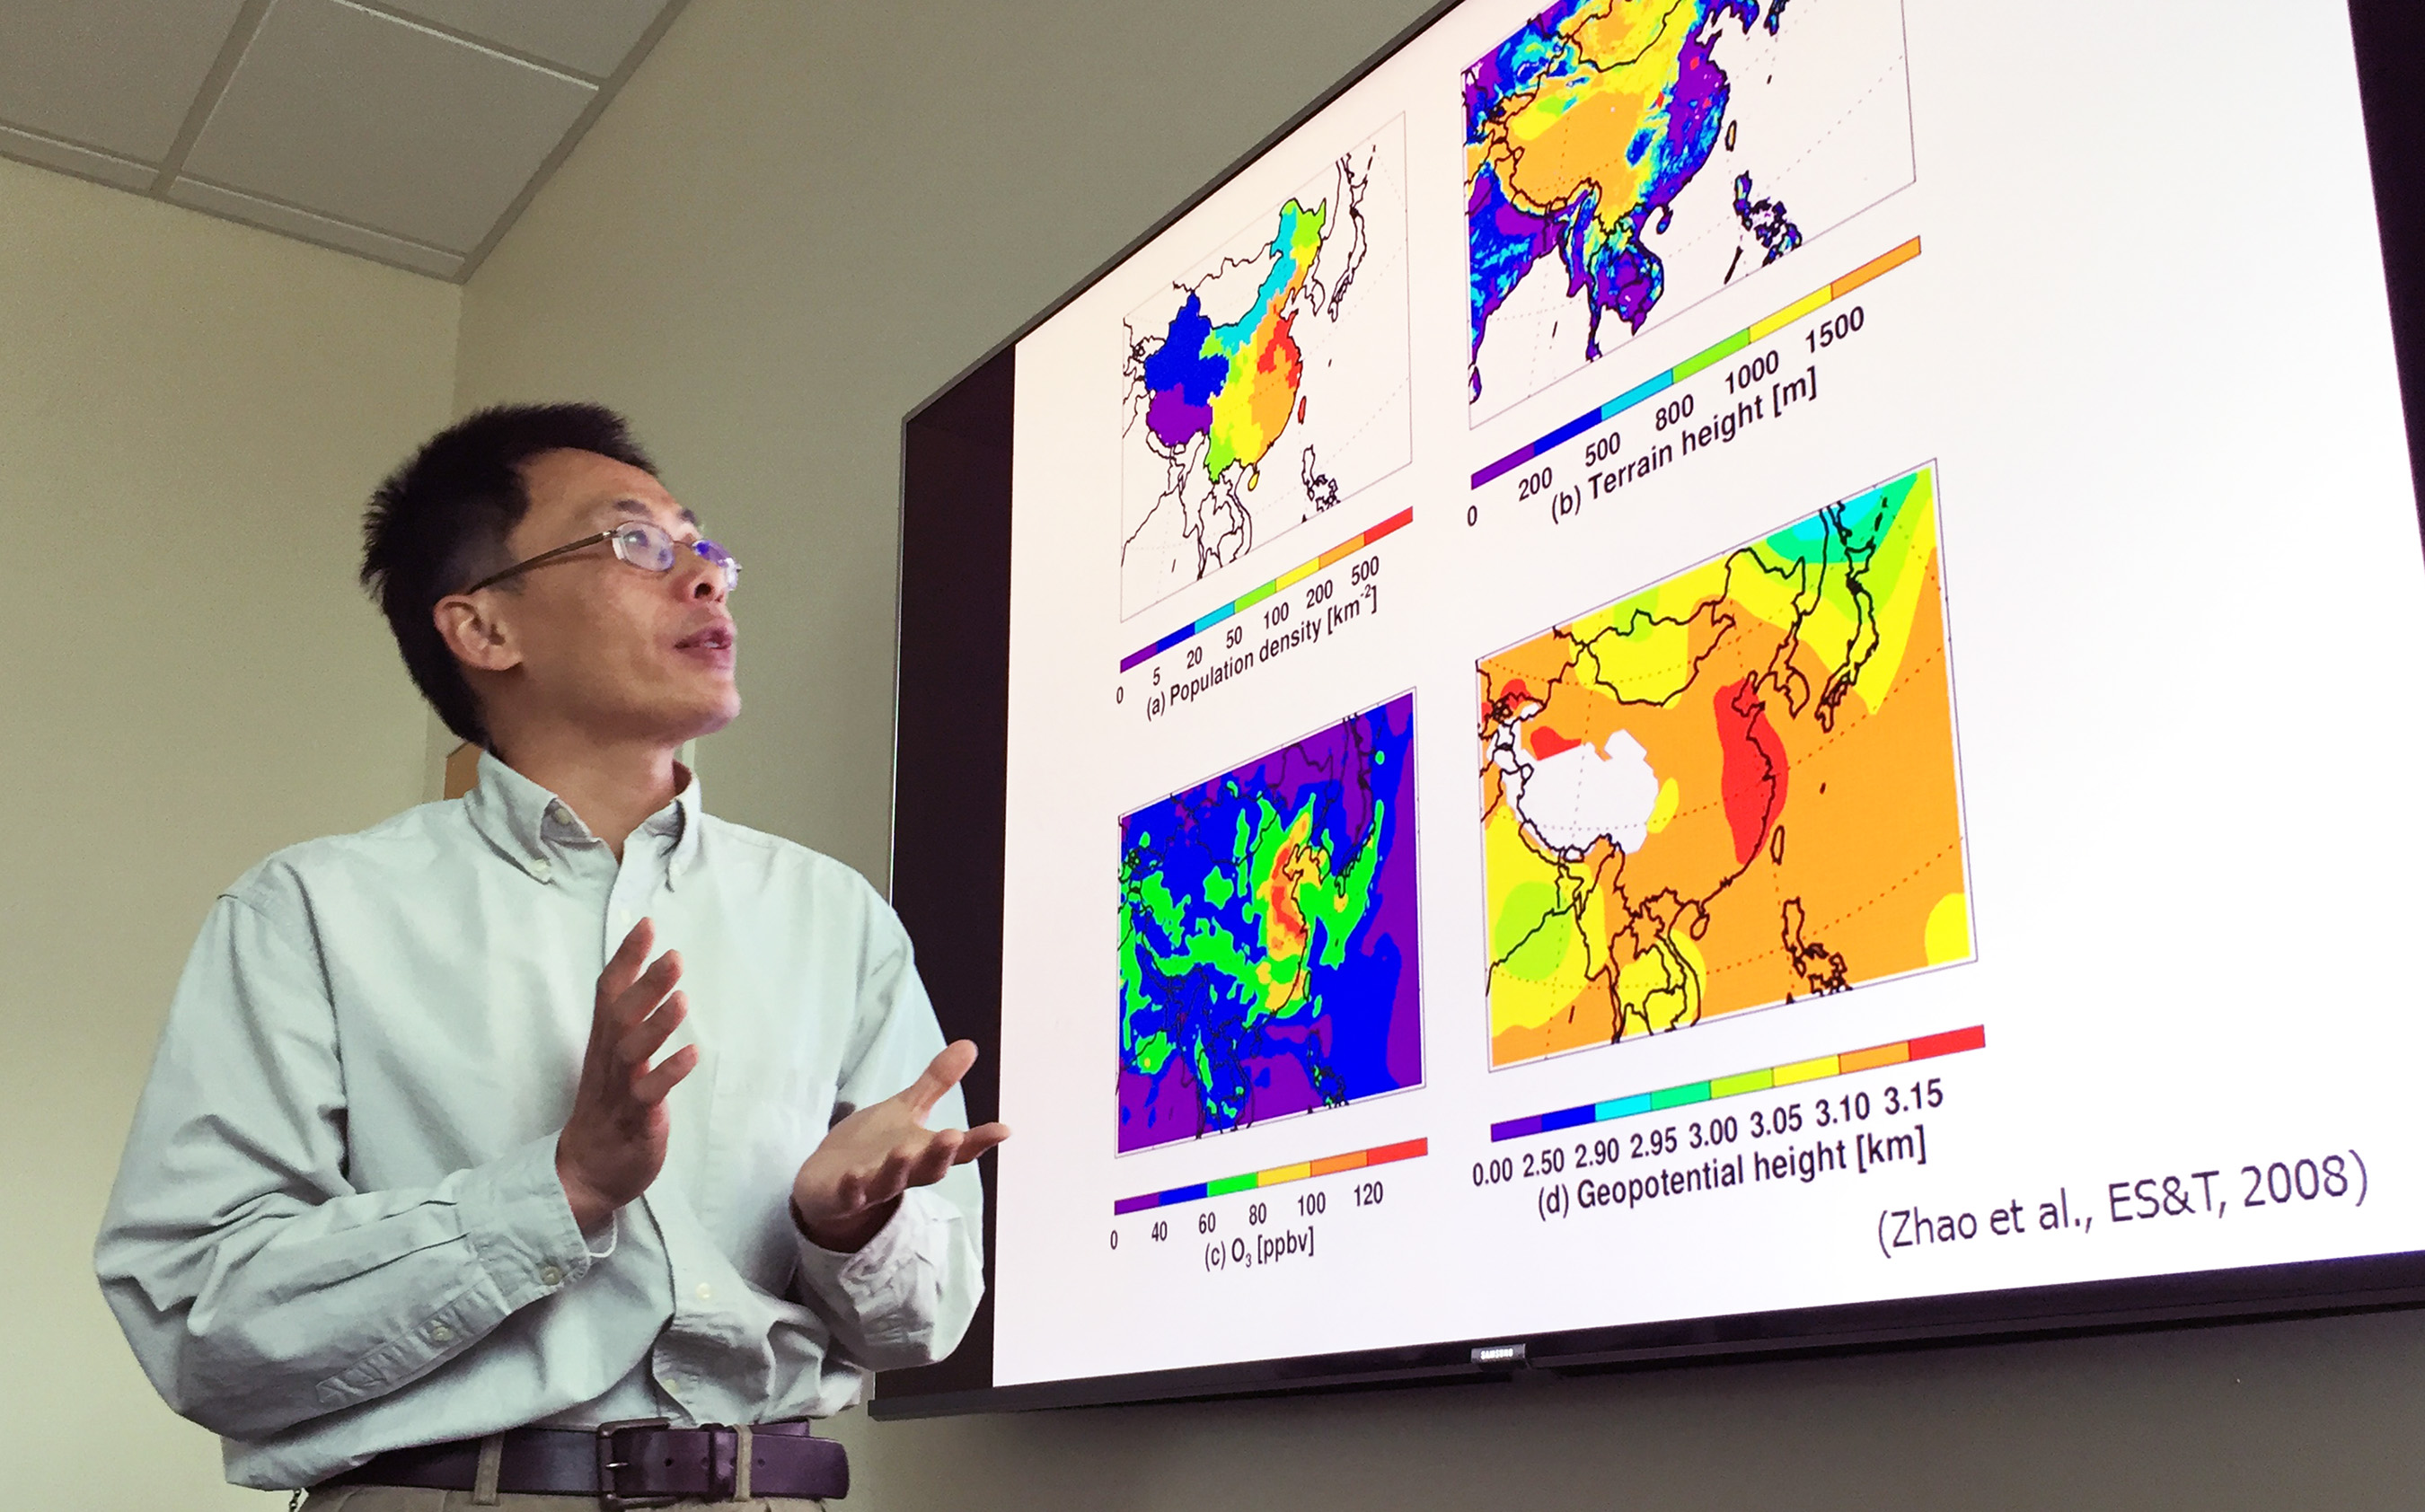 Georgia Tech Professor Yuhang Wang explains maps showing terrain, population density and other issues affecting haze formation in the East China Plains during winter months. (Credit: John Toon, Georgia Tech)